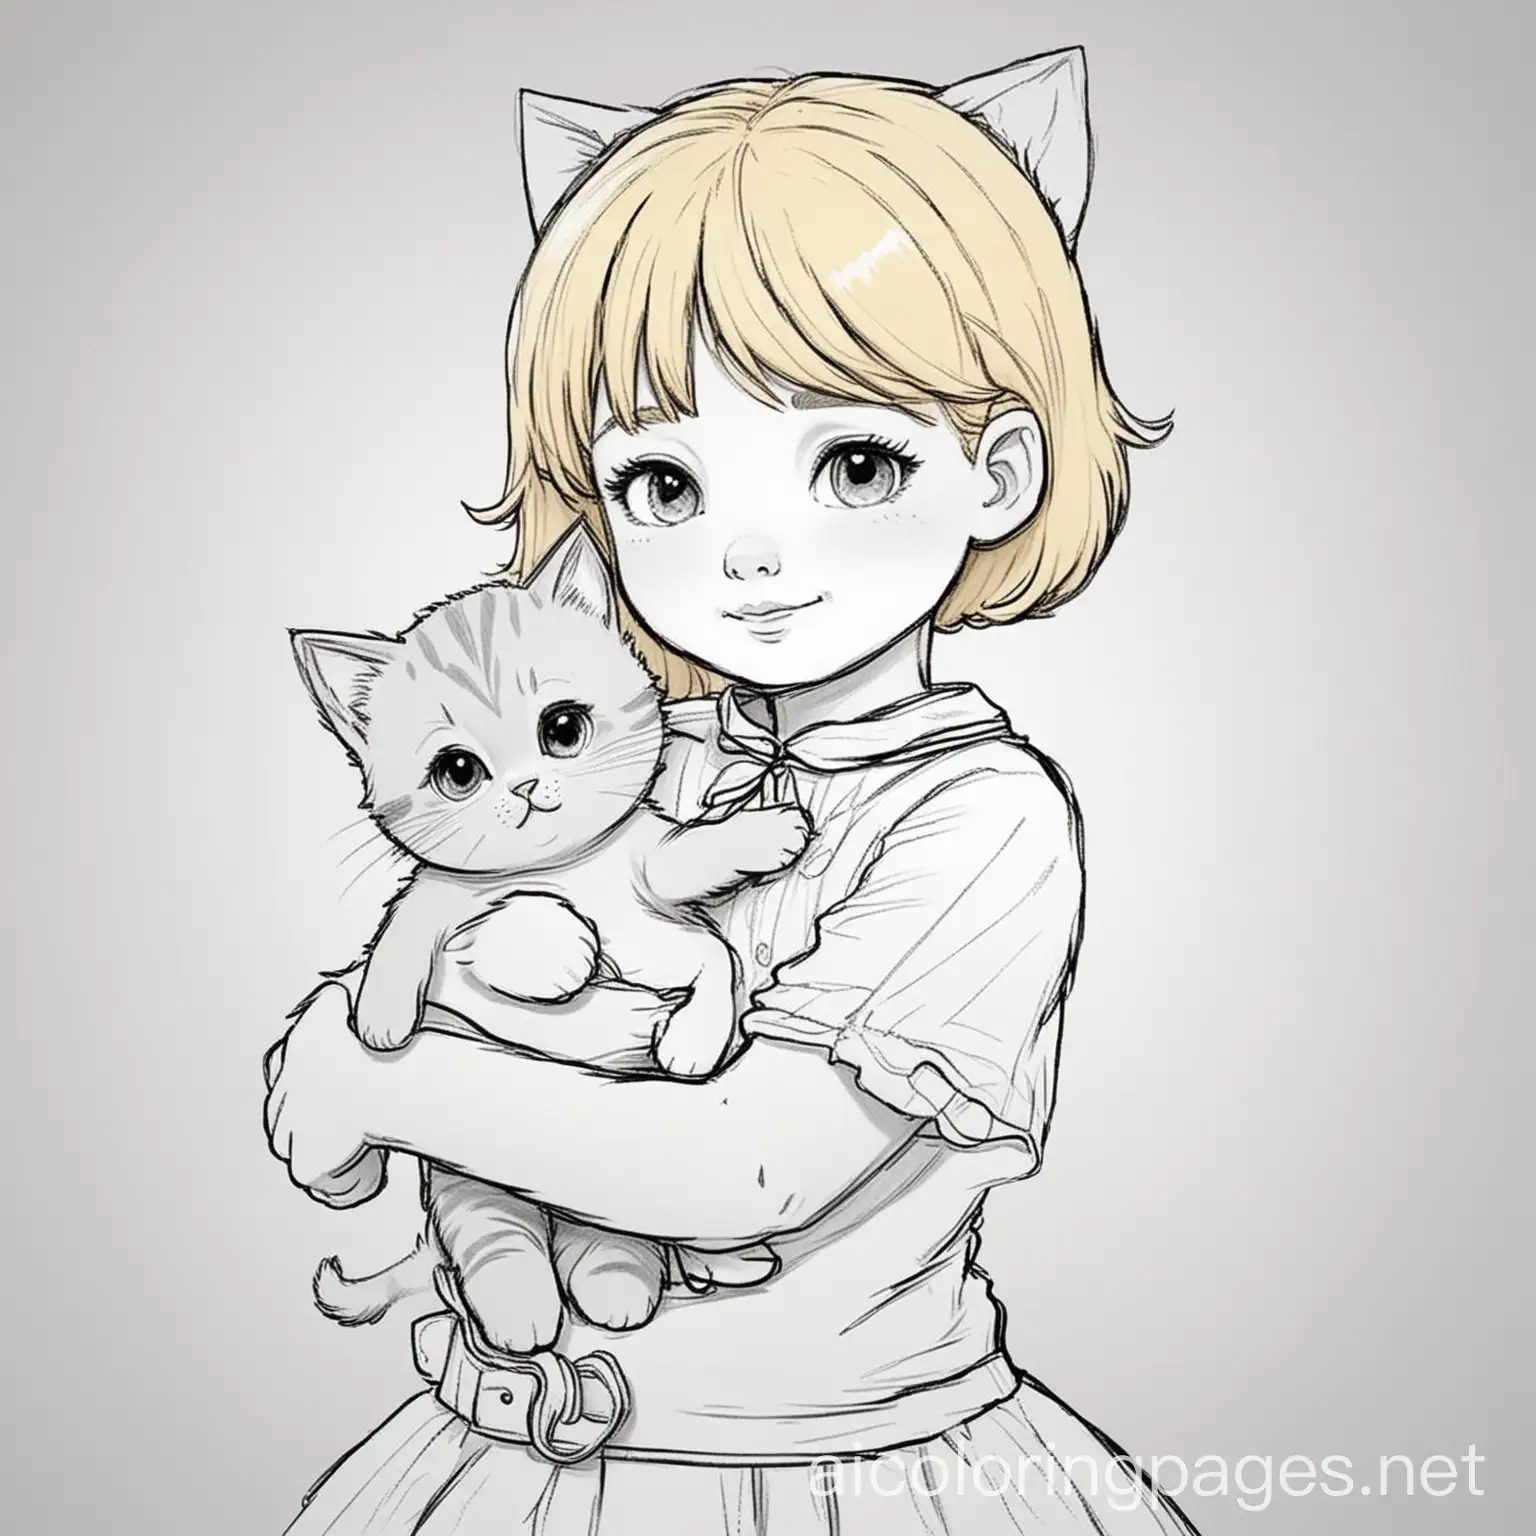 blond short hair 6 year old girl cat in arms, Coloring Page, black and white, line art, white background, Simplicity, Ample White Space. The background of the coloring page is plain white to make it easy for young children to color within the lines. The outlines of all the subjects are easy to distinguish, making it simple for kids to color without too much difficulty